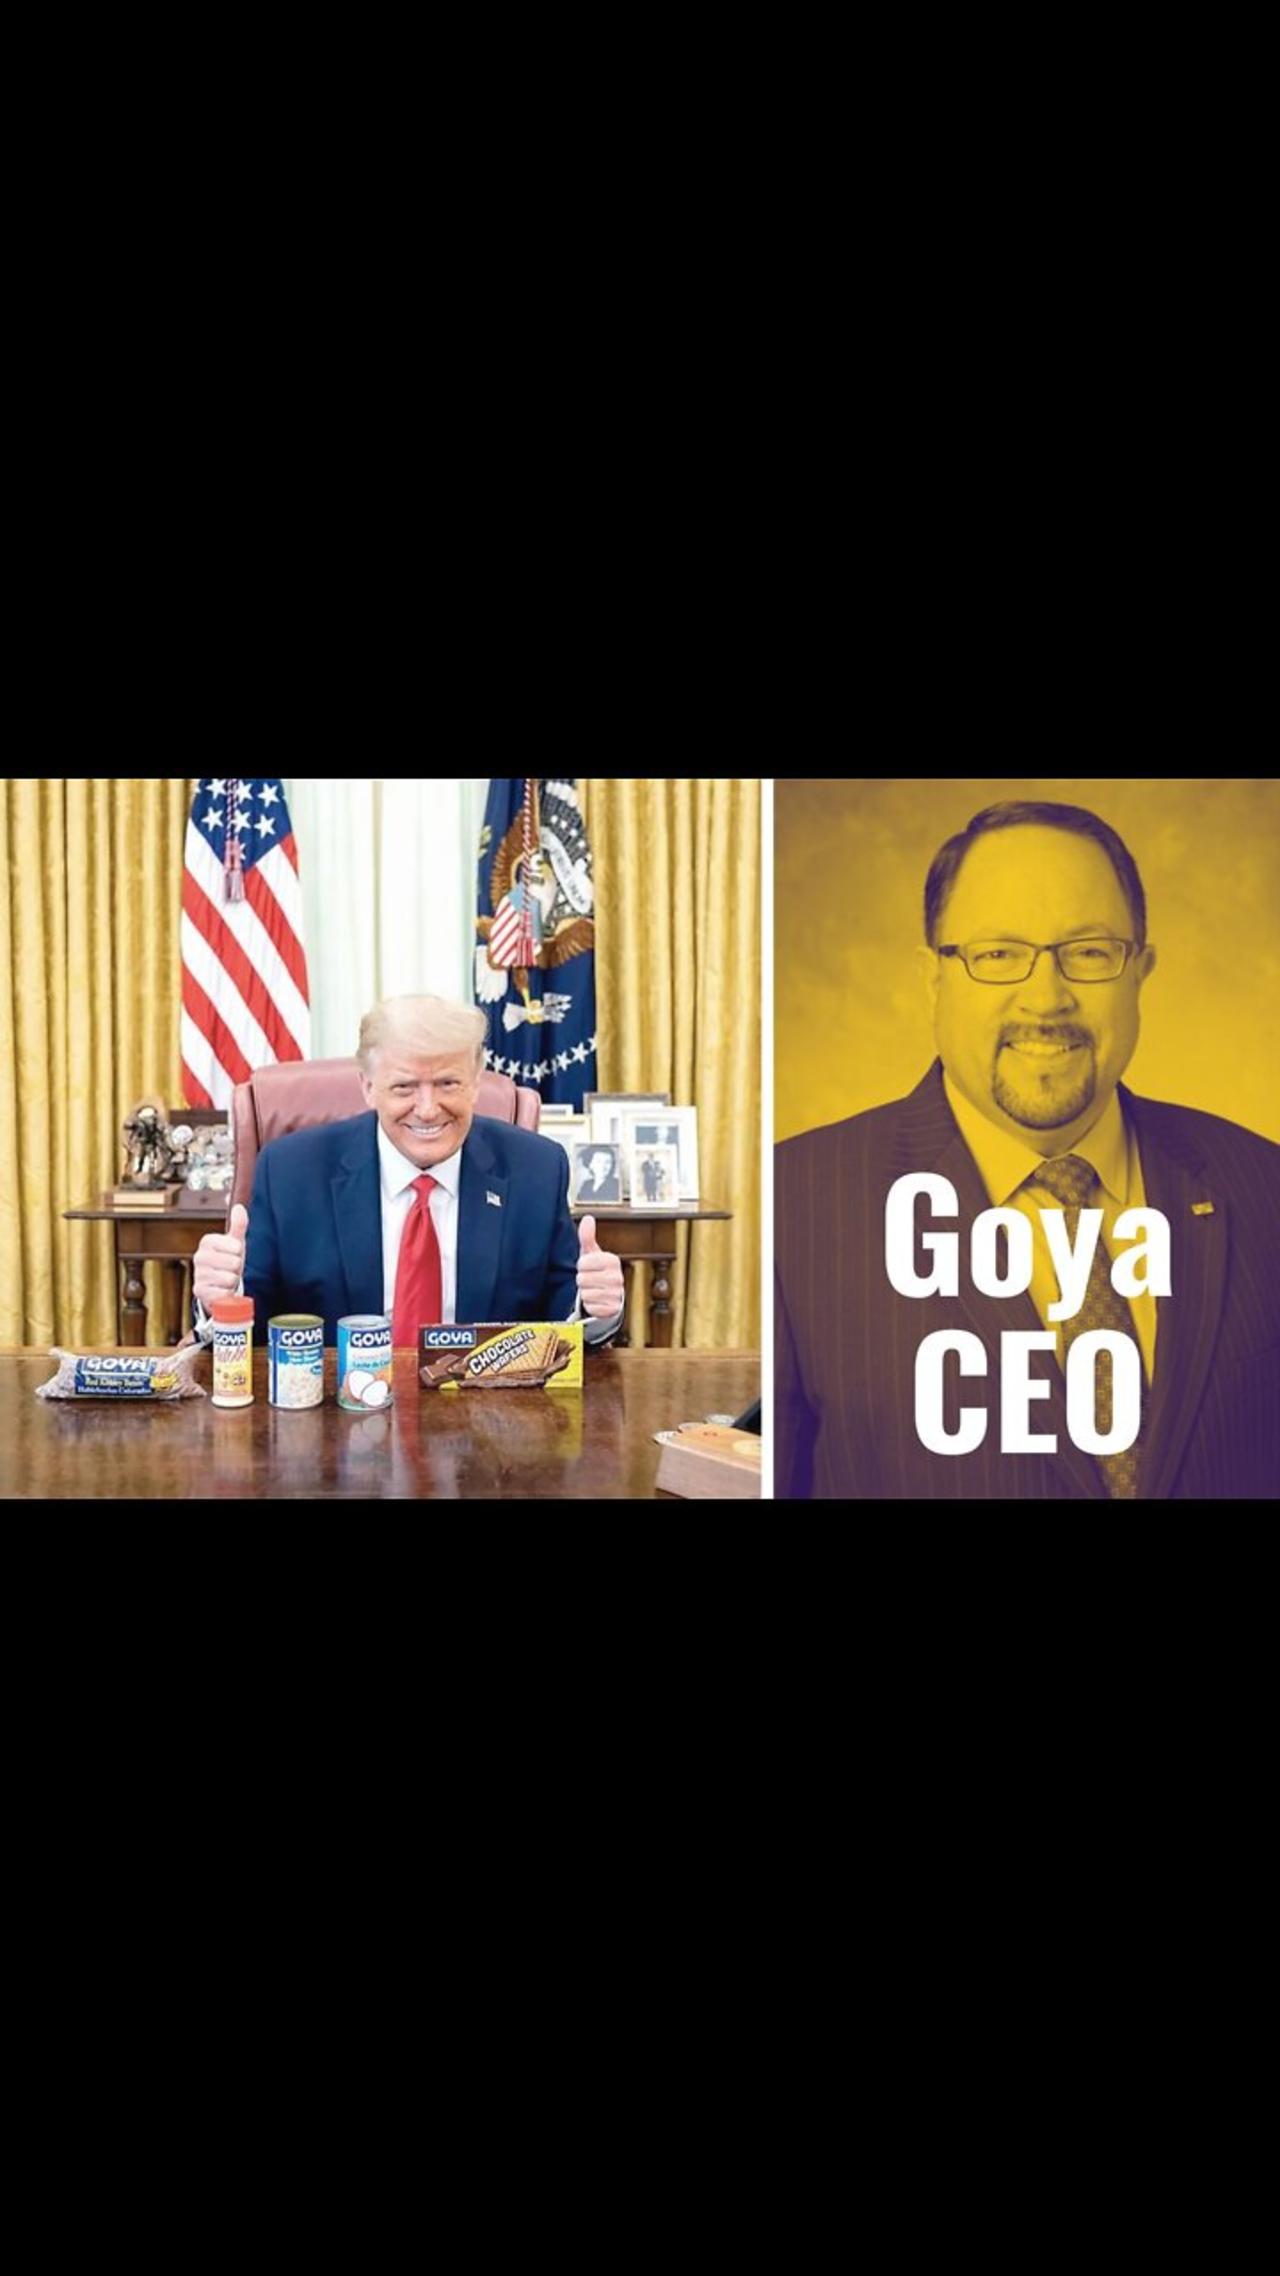 This is why the CEO of Goya foods believes that the inflationary cycle is evil and must be stopped.